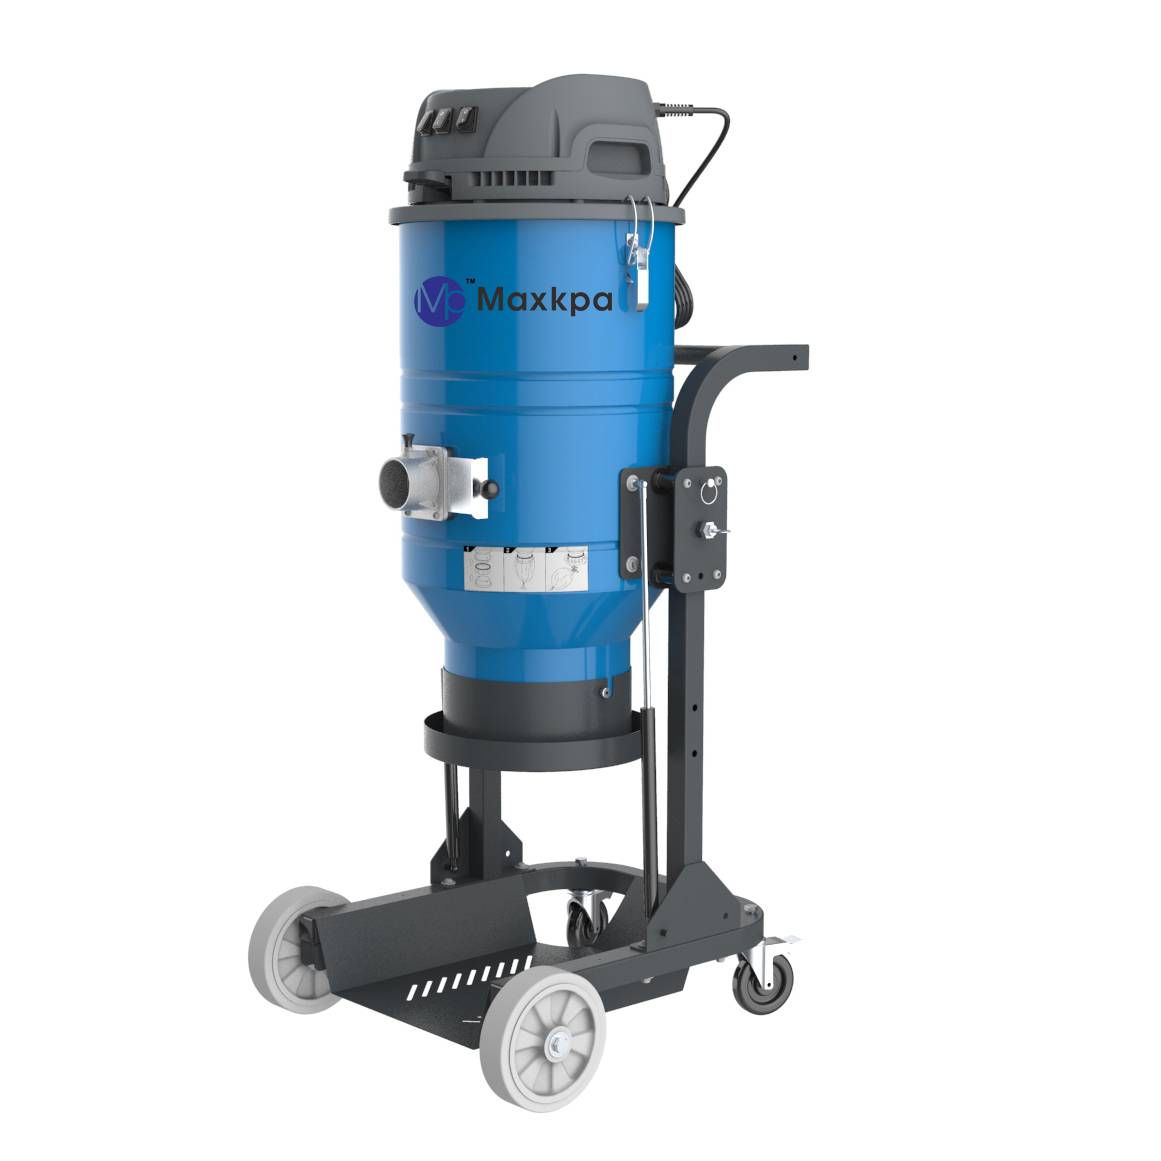 new TS2000 Single phase HEPA dust extractor Featured Image